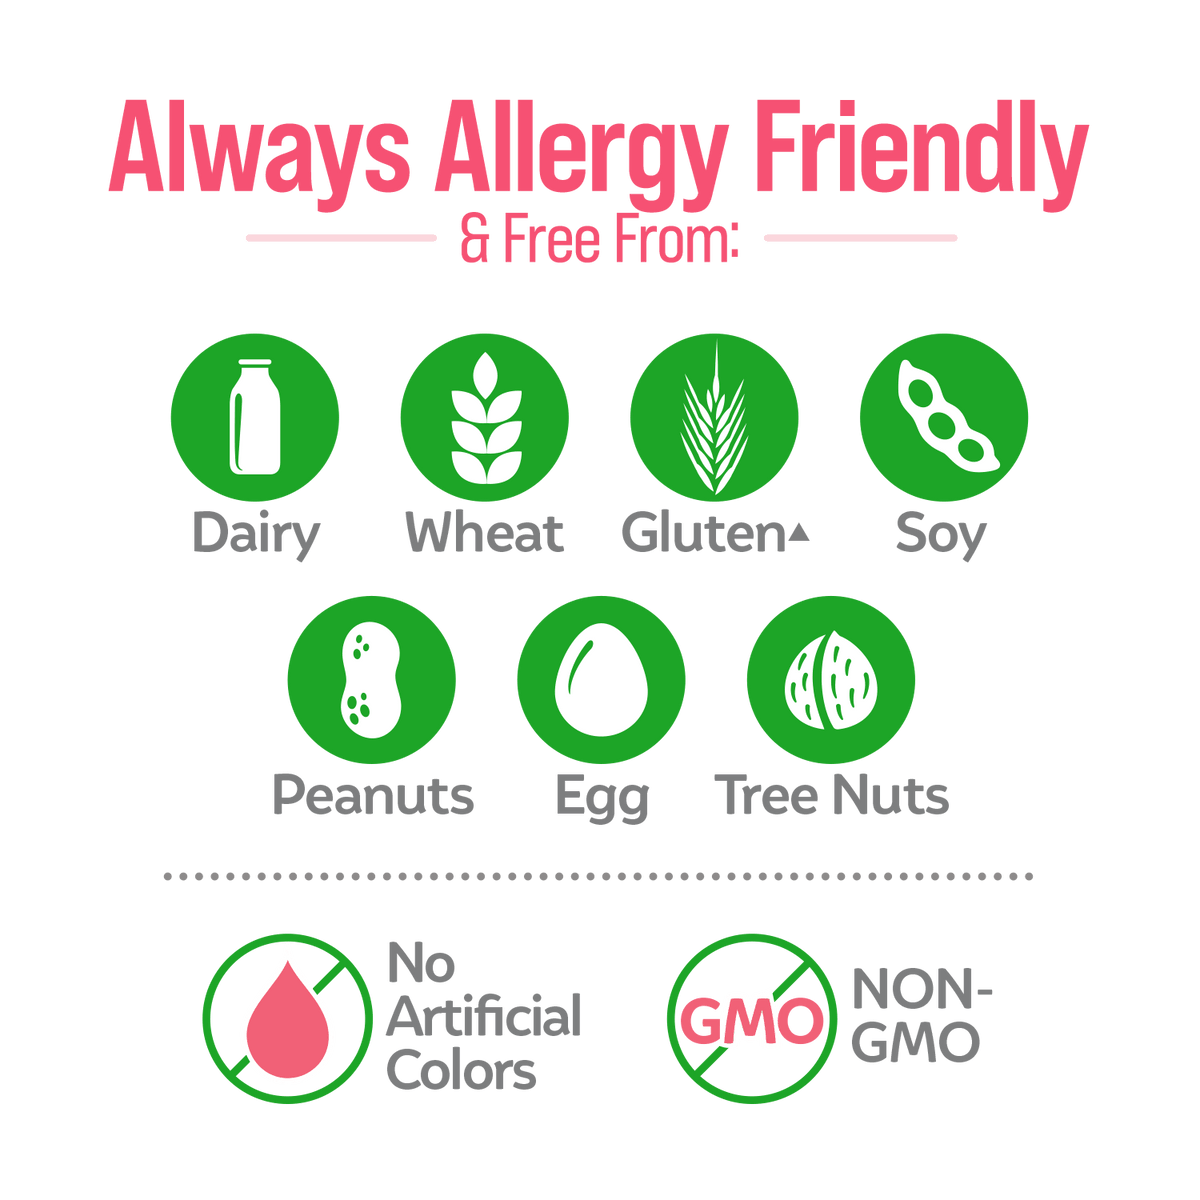 always allergy friendly & free from: dairy, wheat, gluten, soy, peanuts, egg, tree nuts. No artificial colors and non-GMO